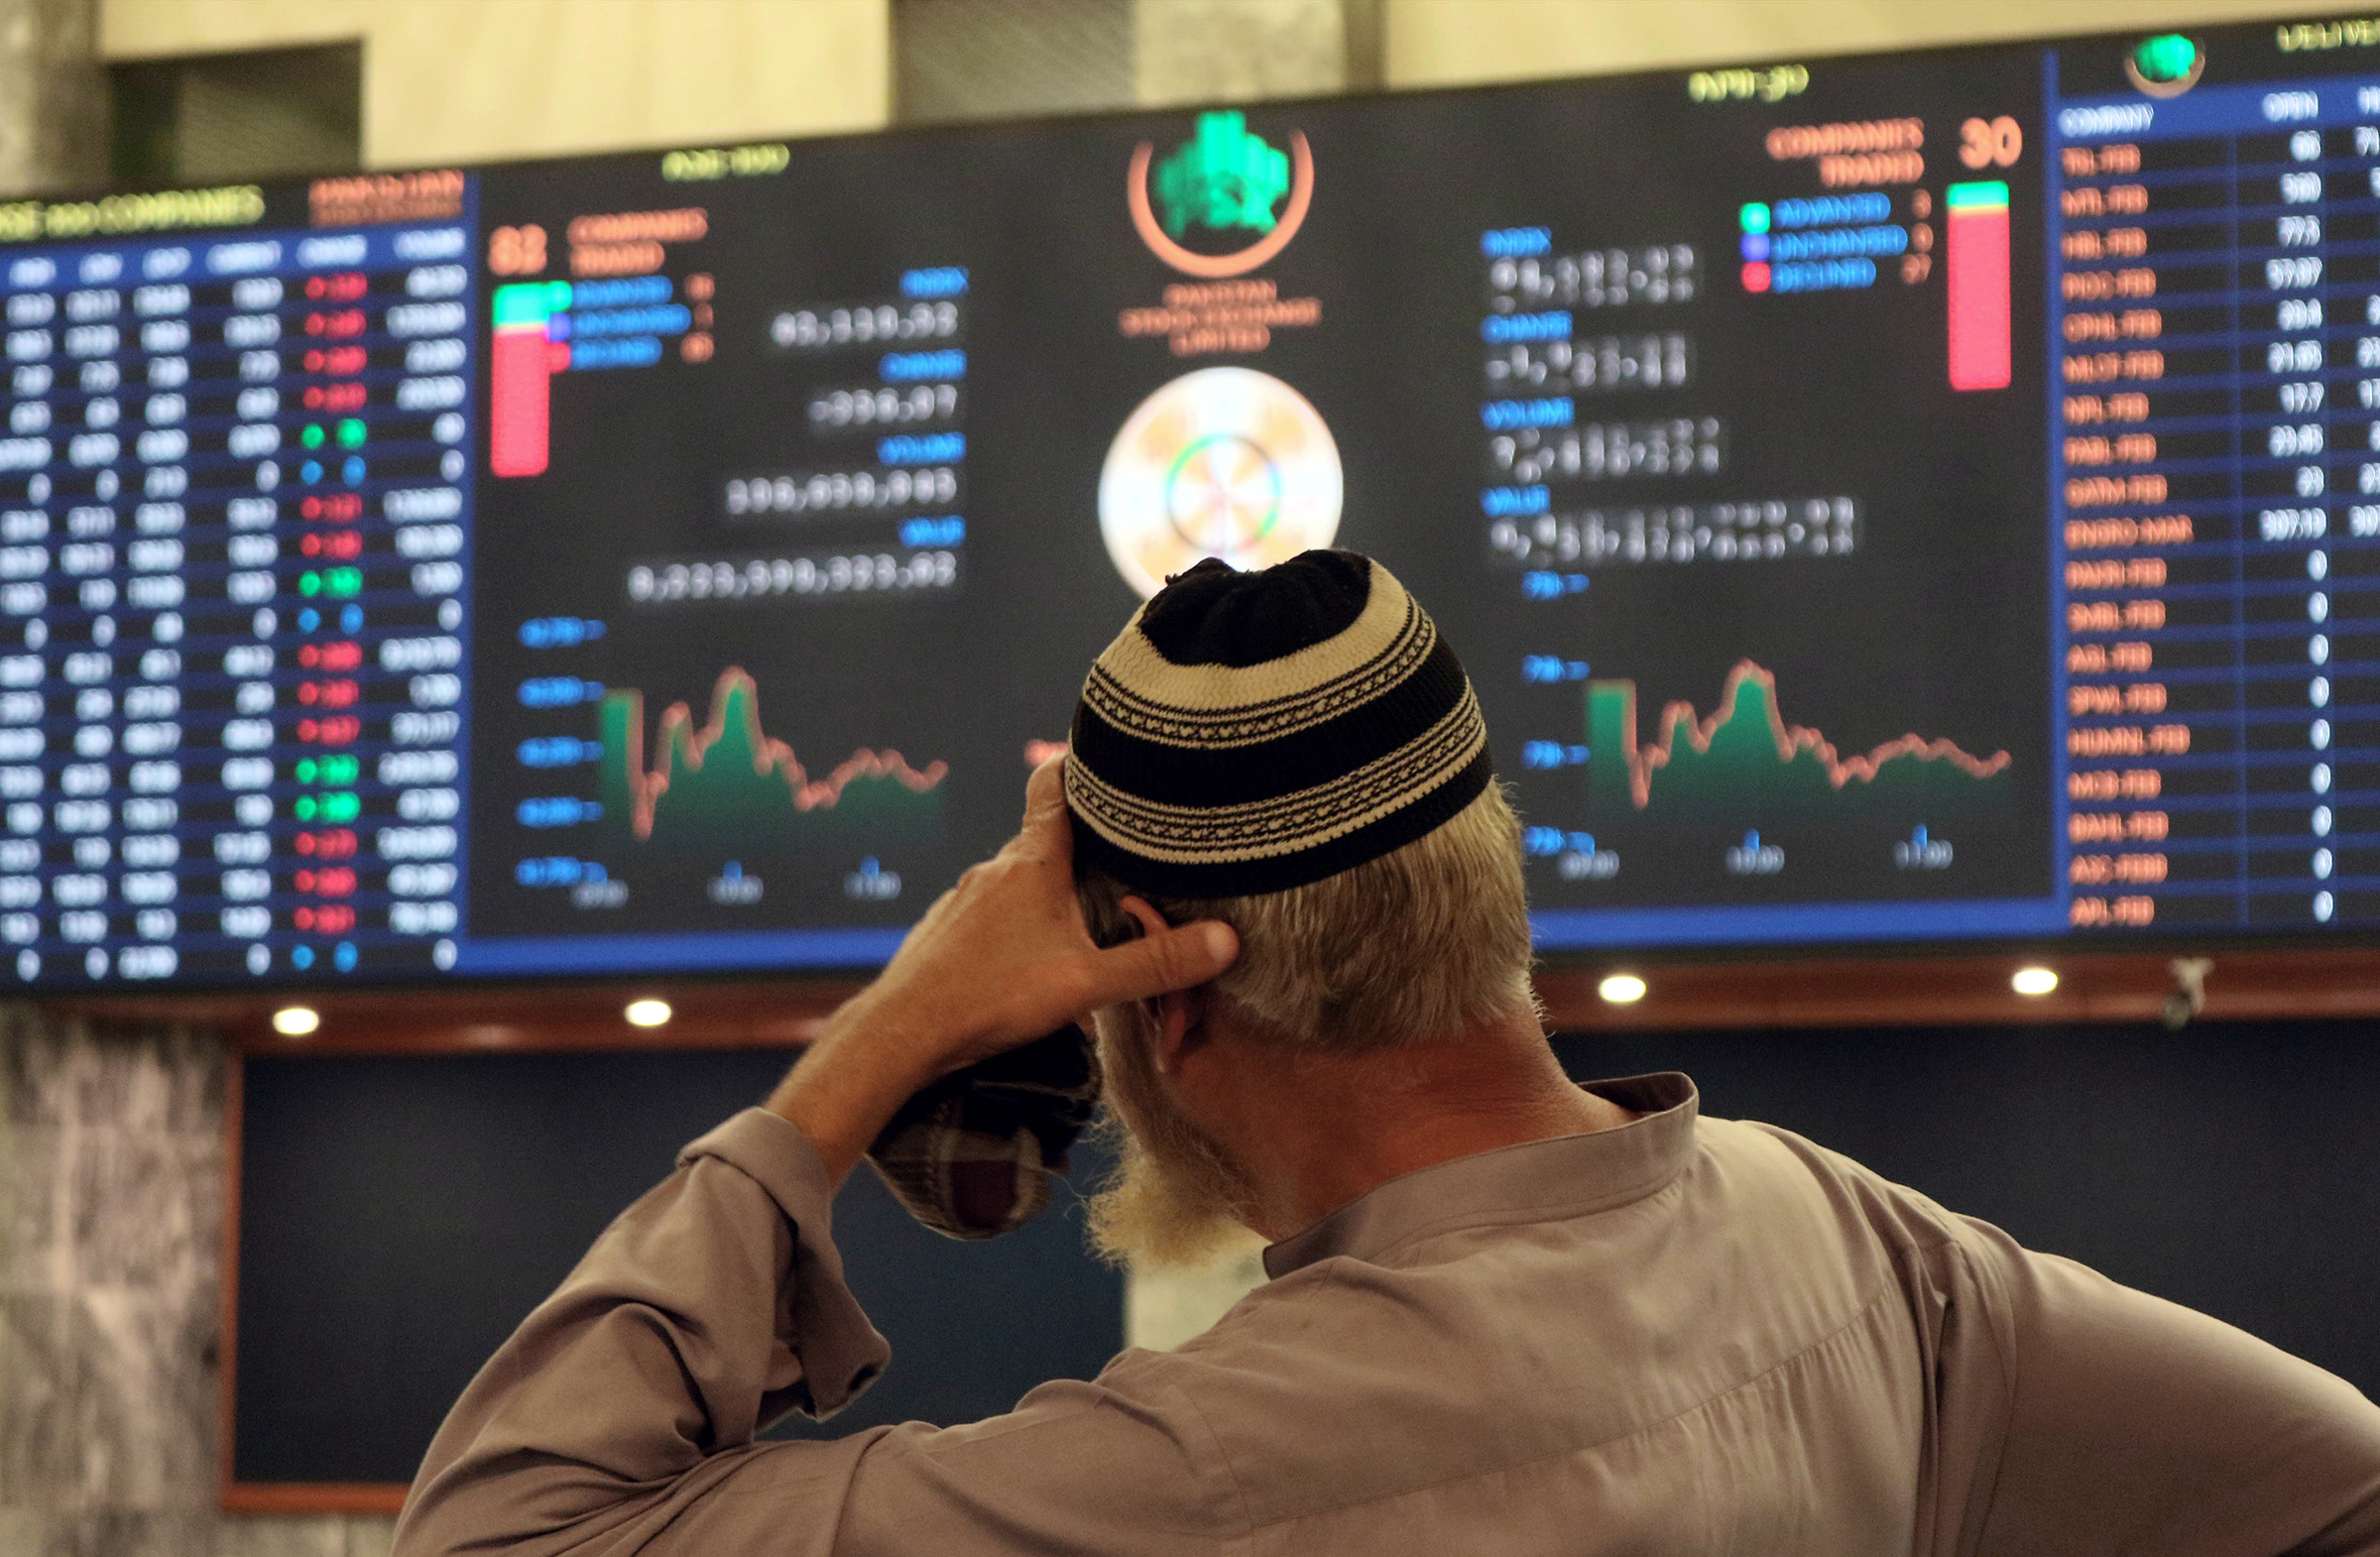 A Pakistani stockbroker monitors the latest share prices during a trading session at the Pakistan Stock Exchange in Karachi, Pakistan, on Feb. 10. The sluggish performance of the market was attributed to the delay in concluding the ninth review of a seven billion US dollar IMF loan program.